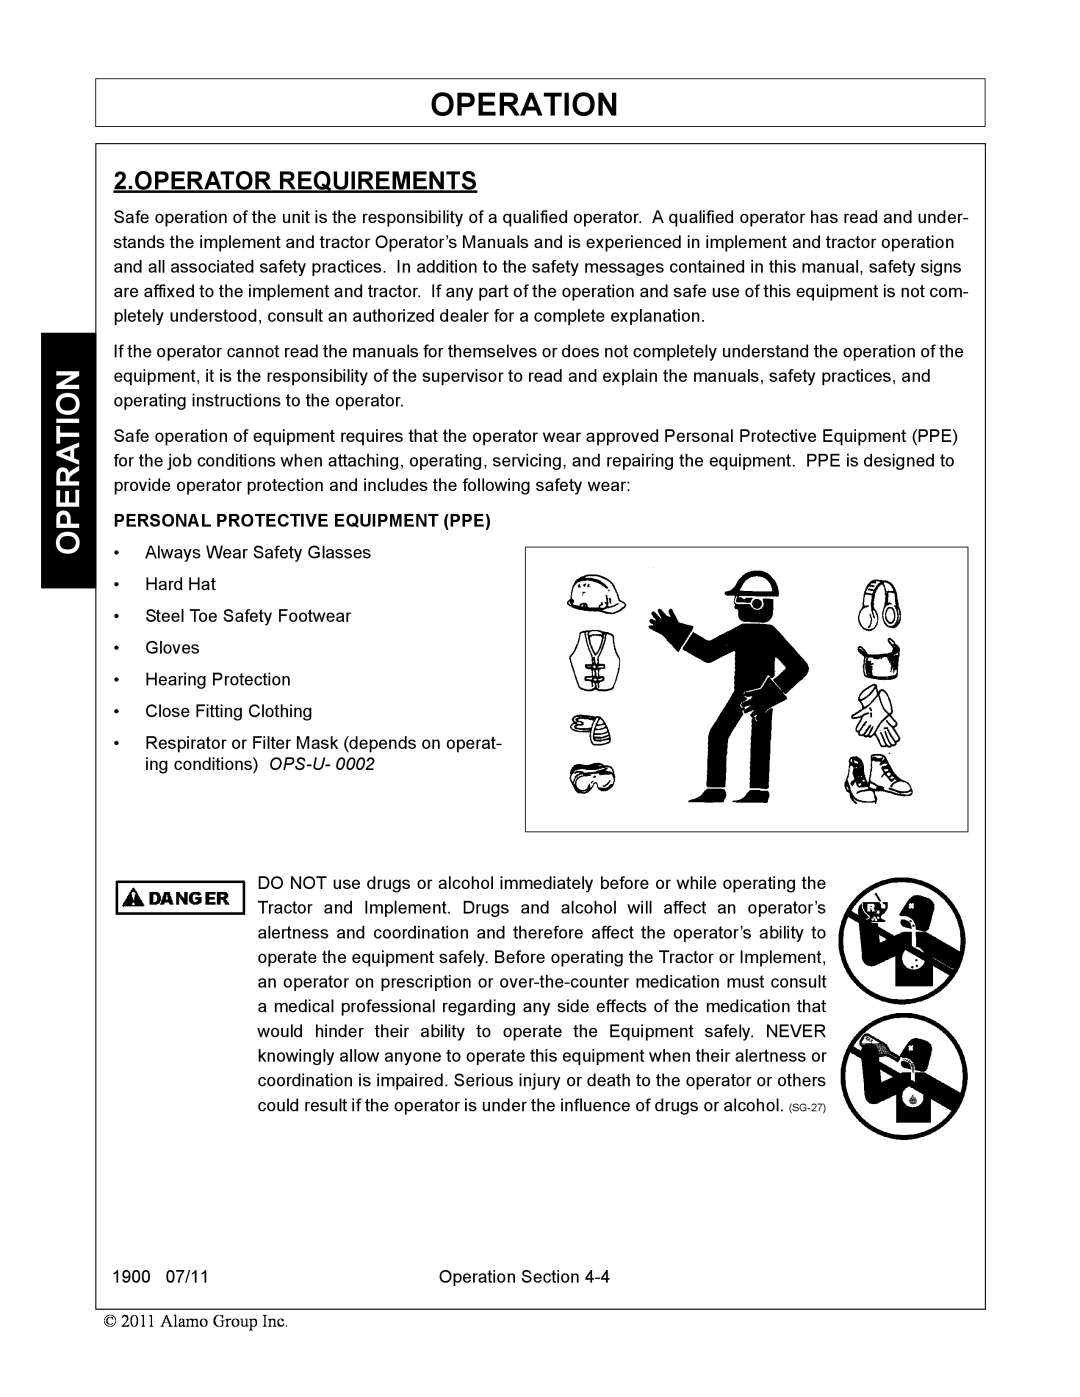 Alamo 1900 manual Operator Requirements, Operation, Personal Protective Equipment Ppe 